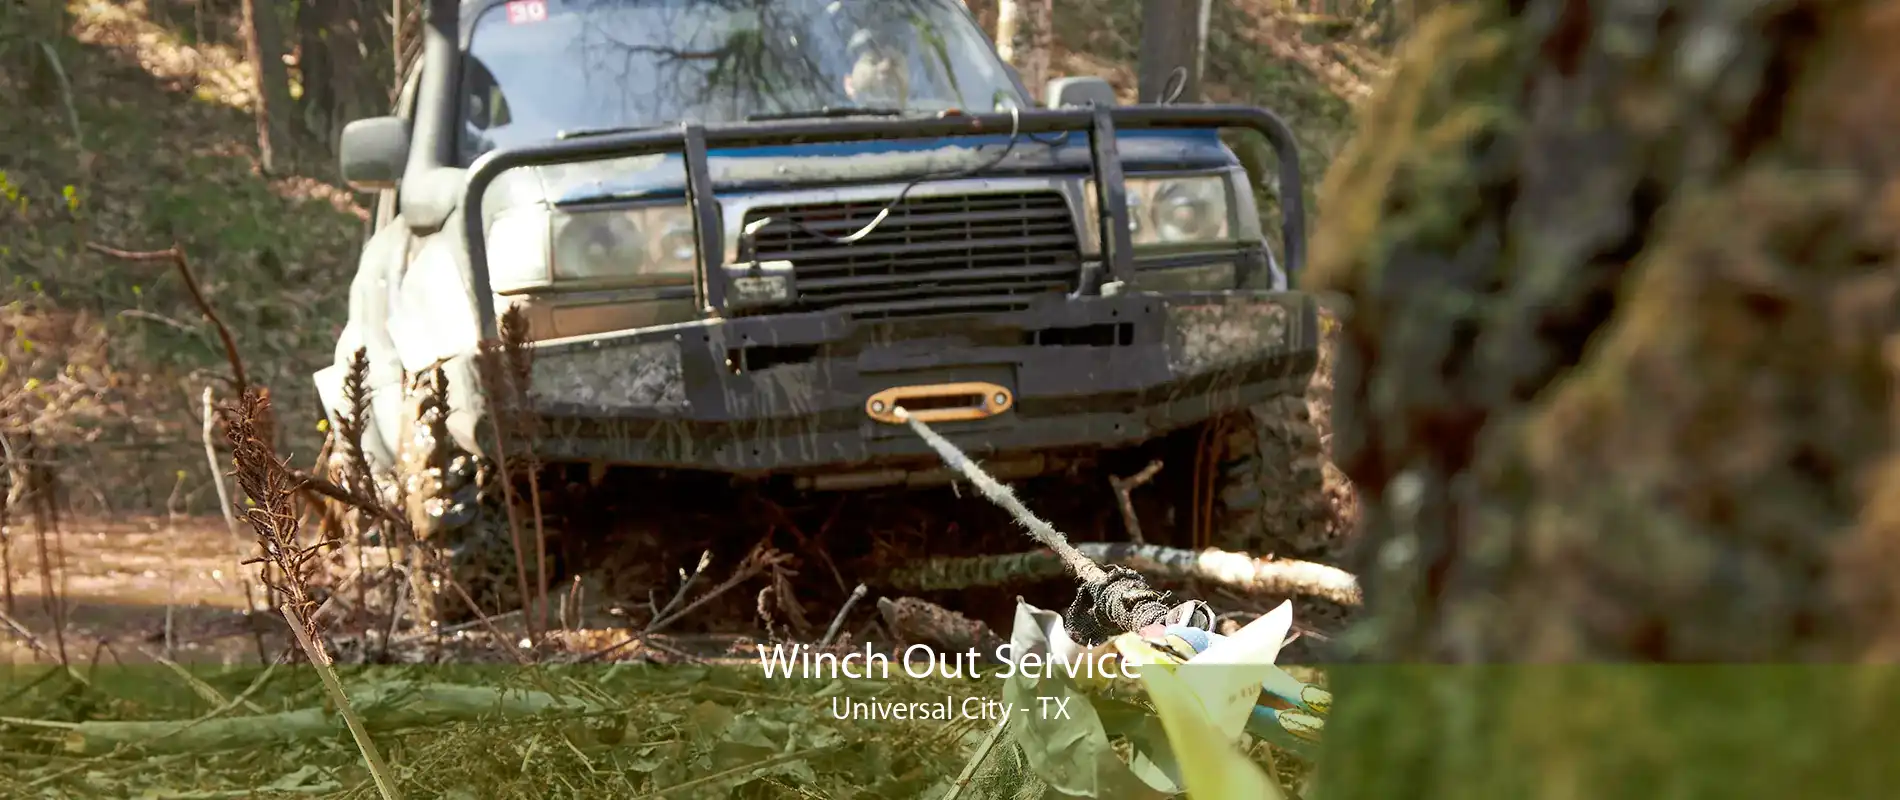 Winch Out Service Universal City - TX